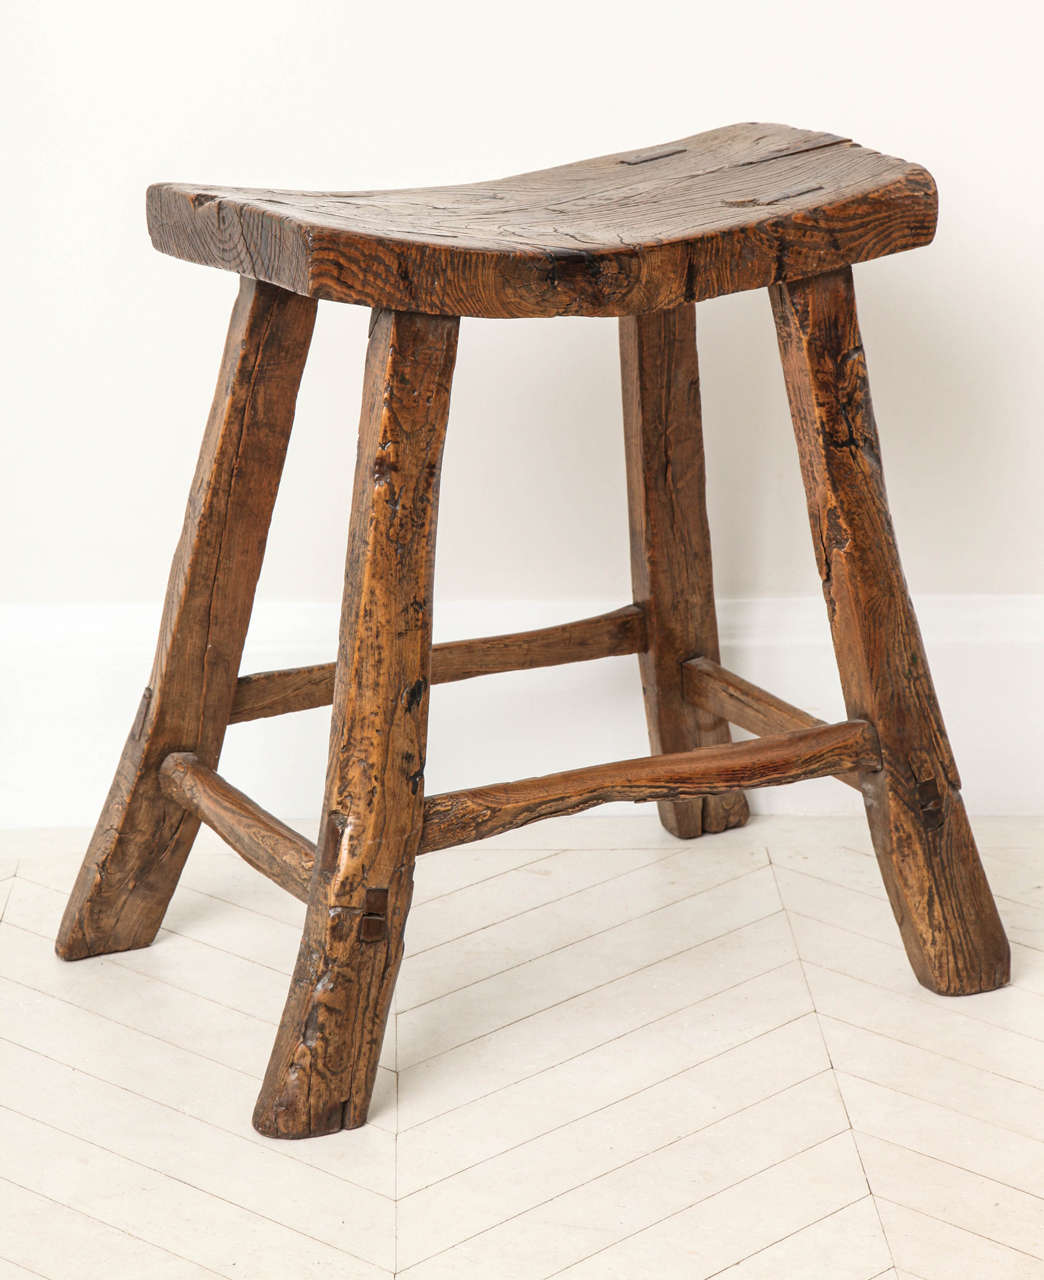 A 19th century Chinese elm wood stool with sloped seat, splayed legs, pegged construction and an overall mellow patination